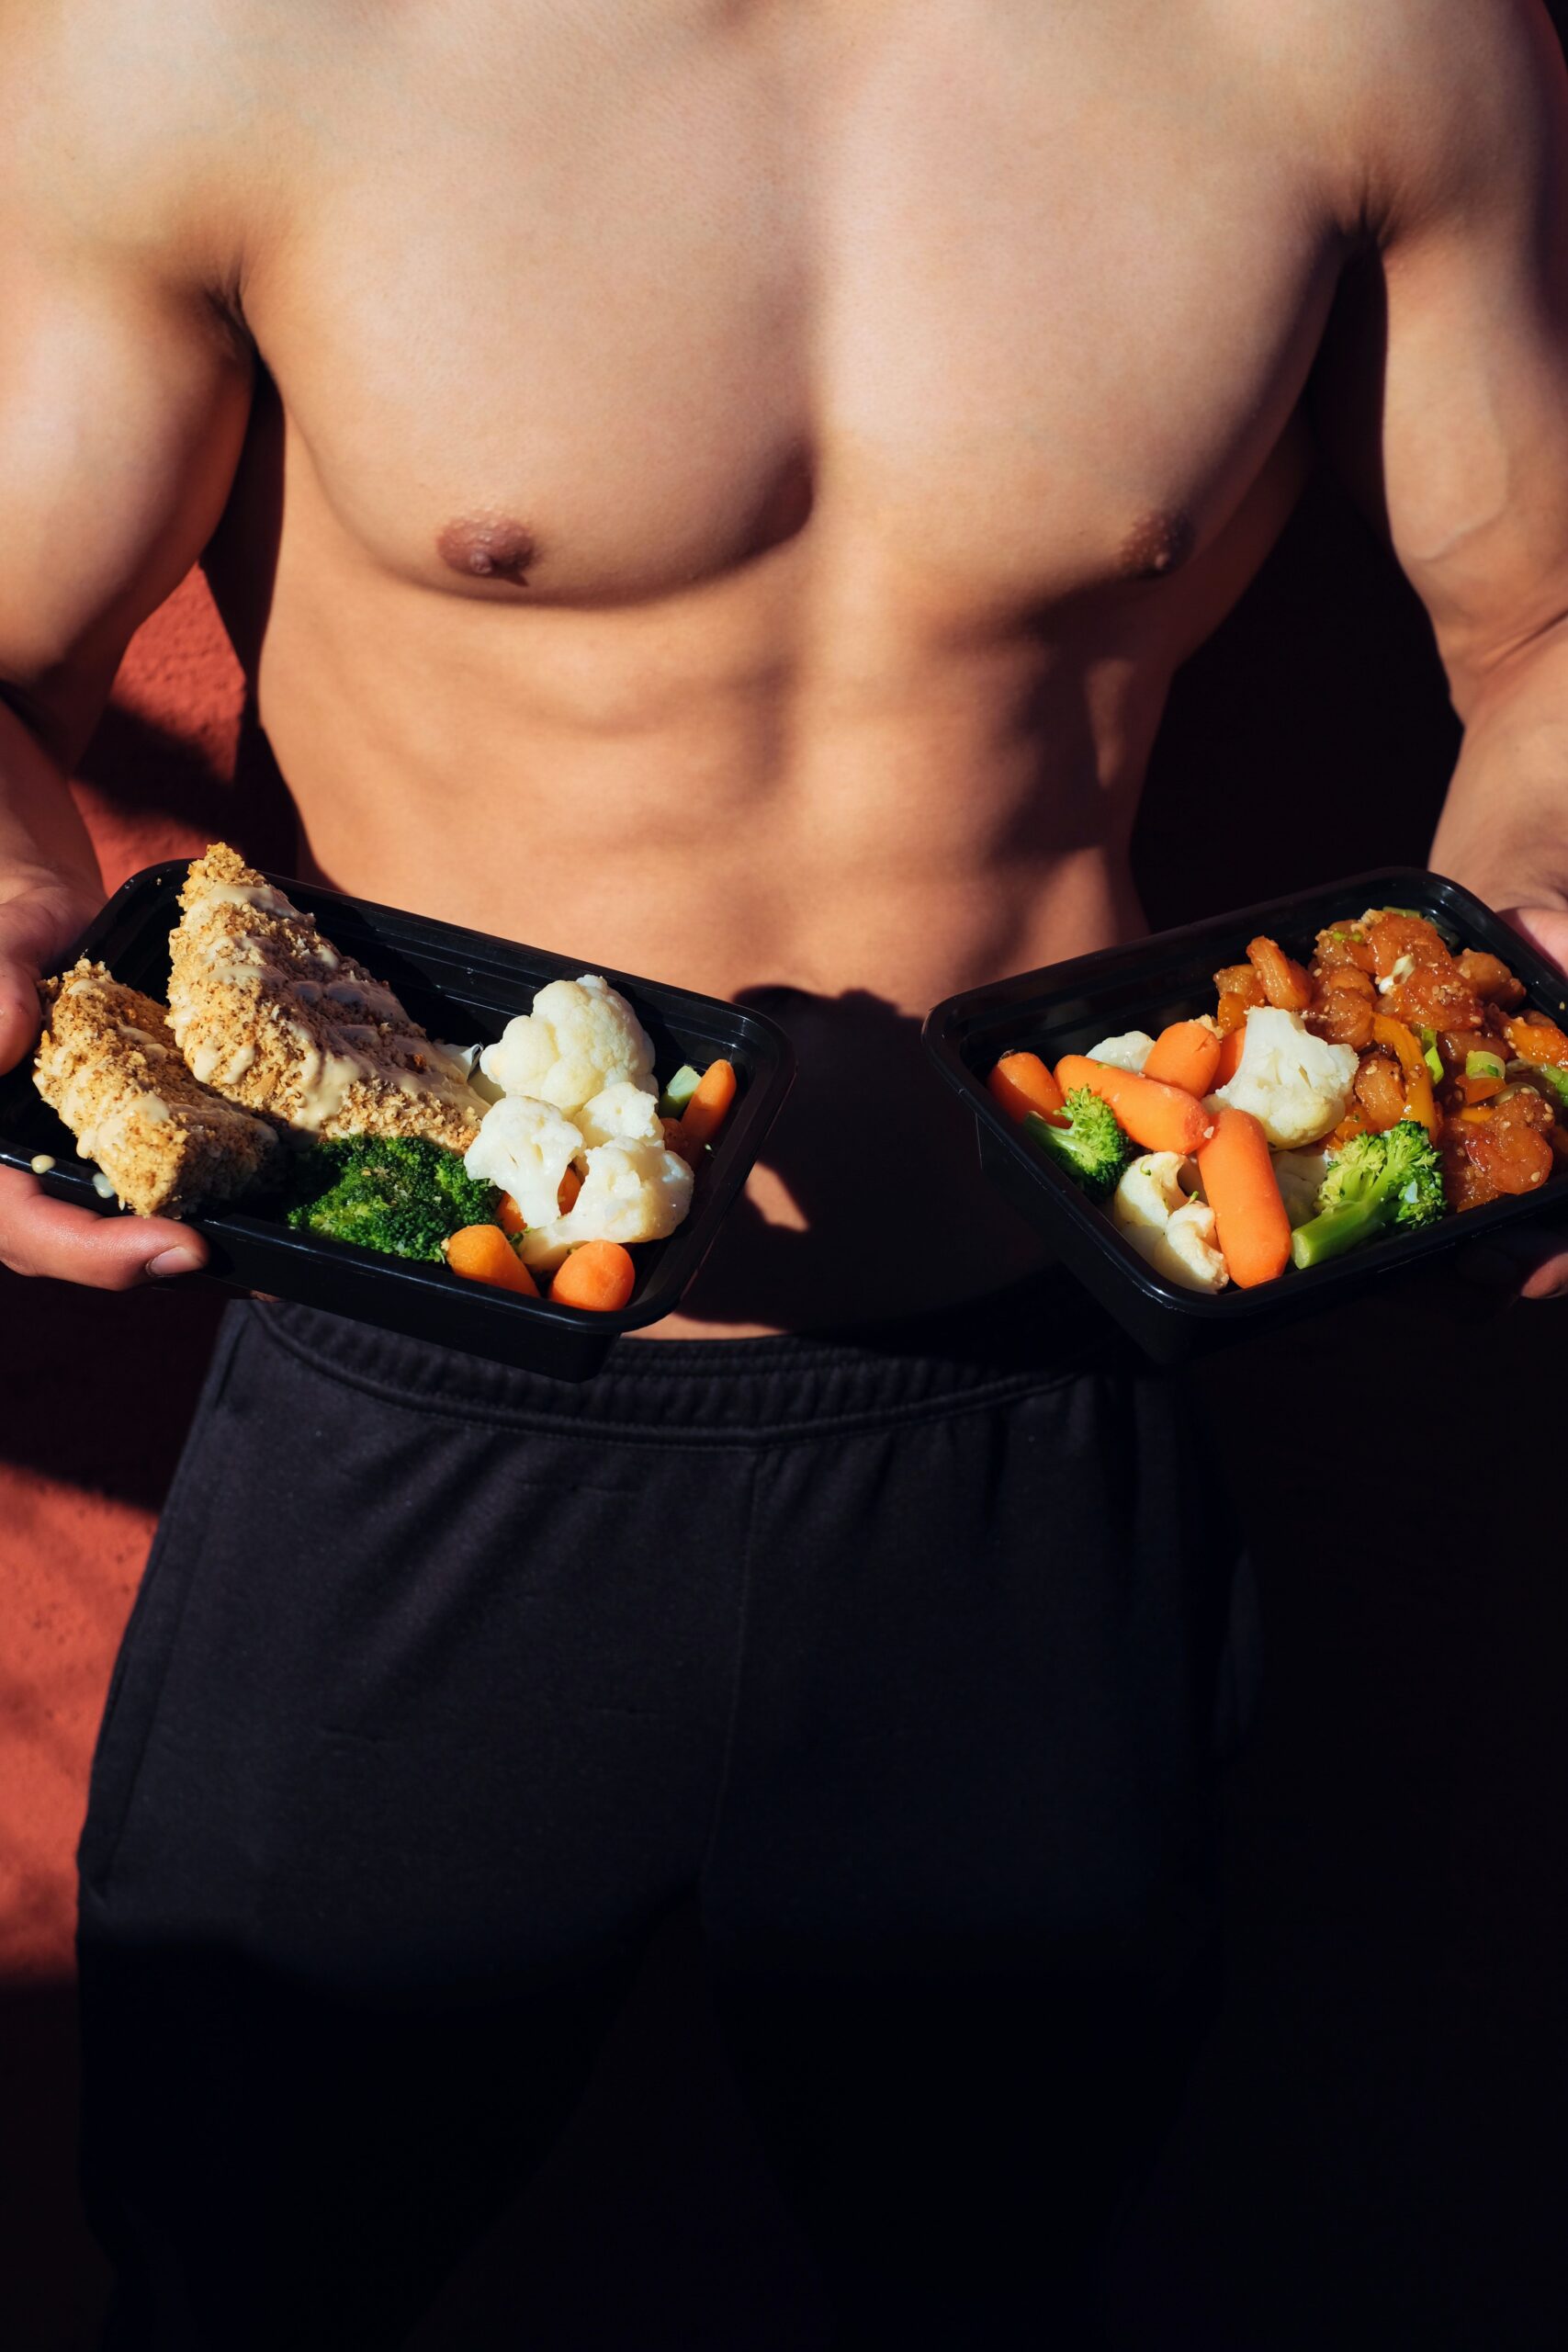 4 Basic Actions to Kick-Start Your Nutrition Journey